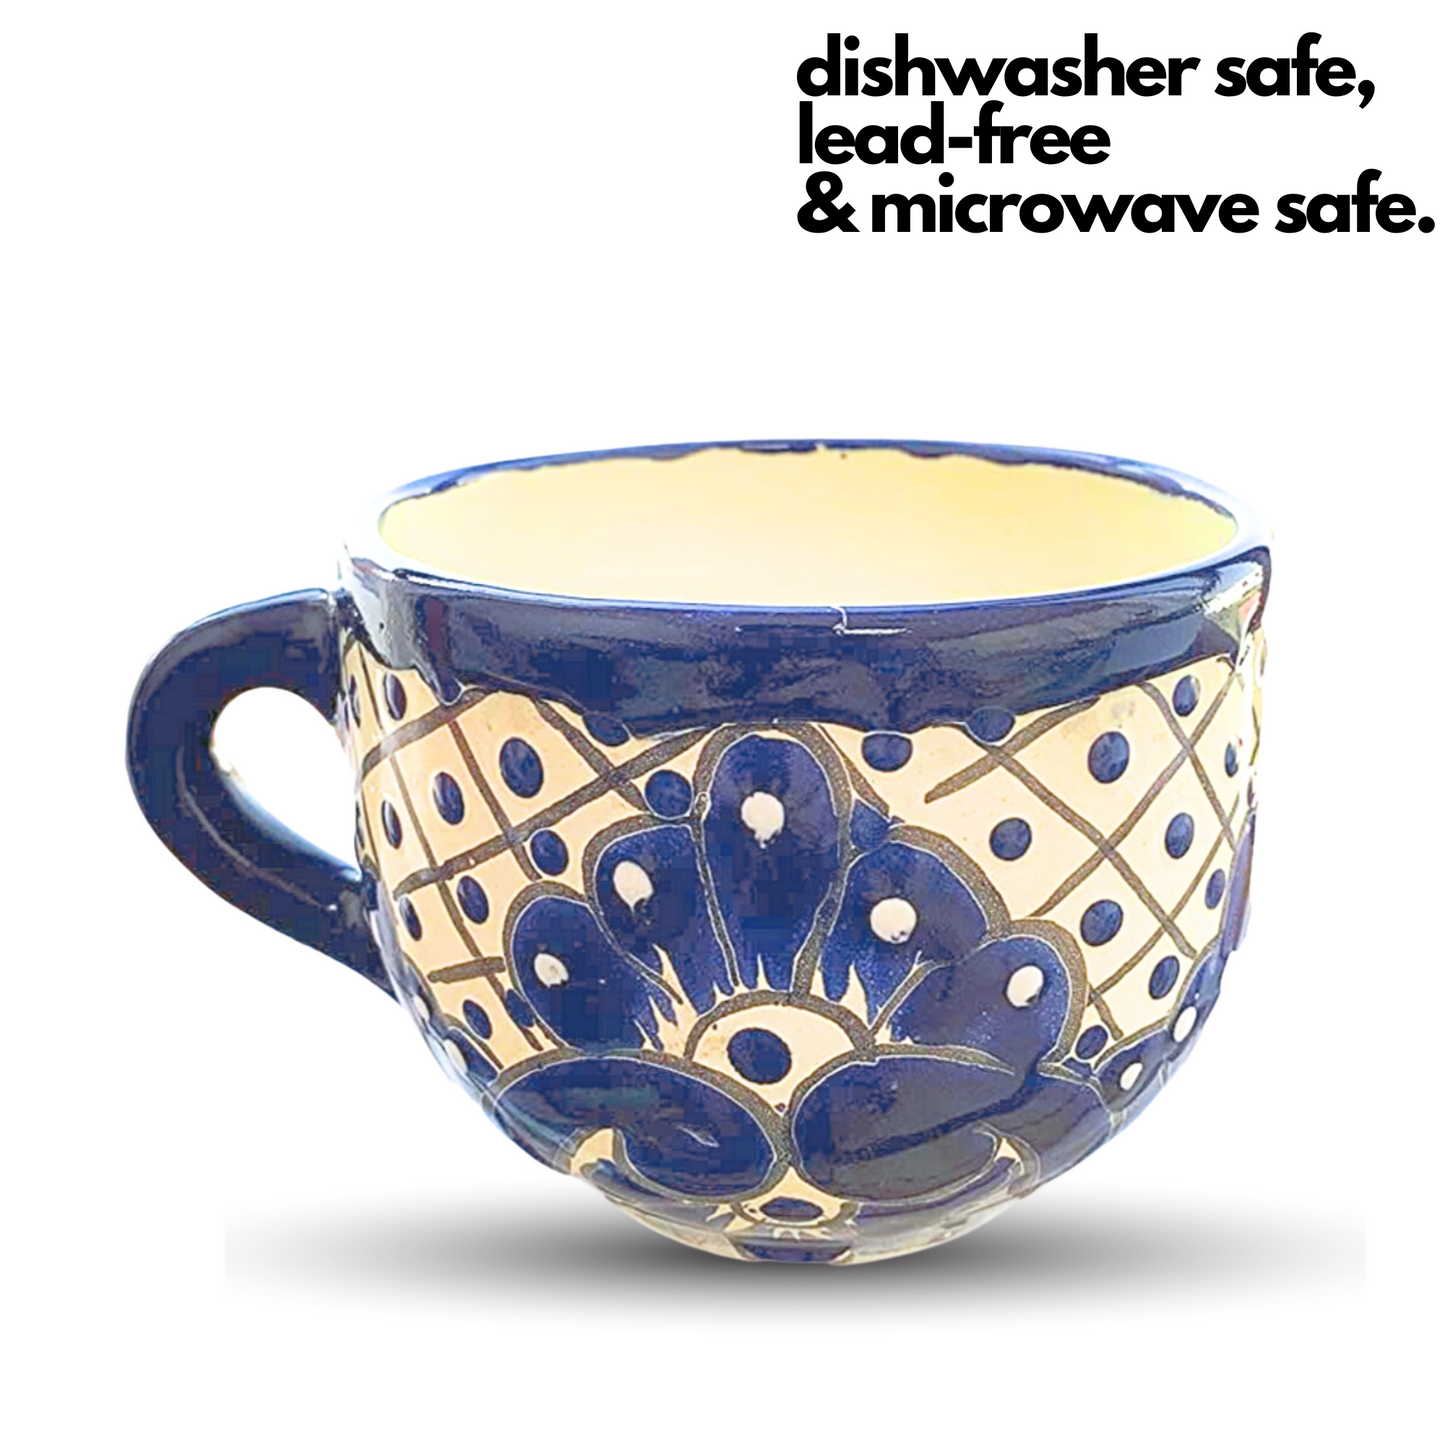 dishwasher safe lead-free microwave safe Hand Painted Wide Mouth Mug in Blue and White - Authentic Mexican Pottery by Casa Fiesta Designs.